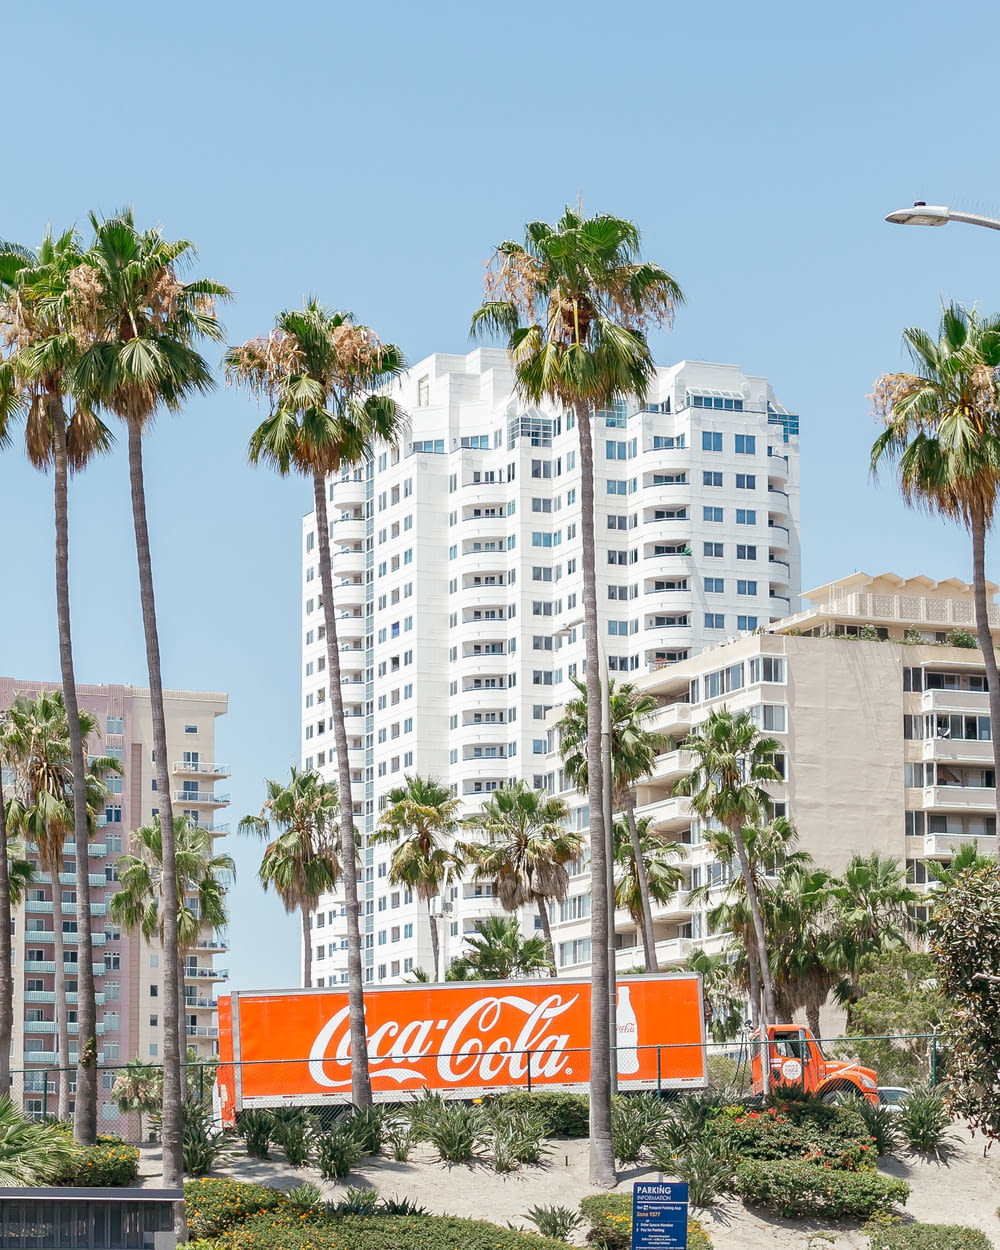 a coca - cola sign in front of palm trees and buildings